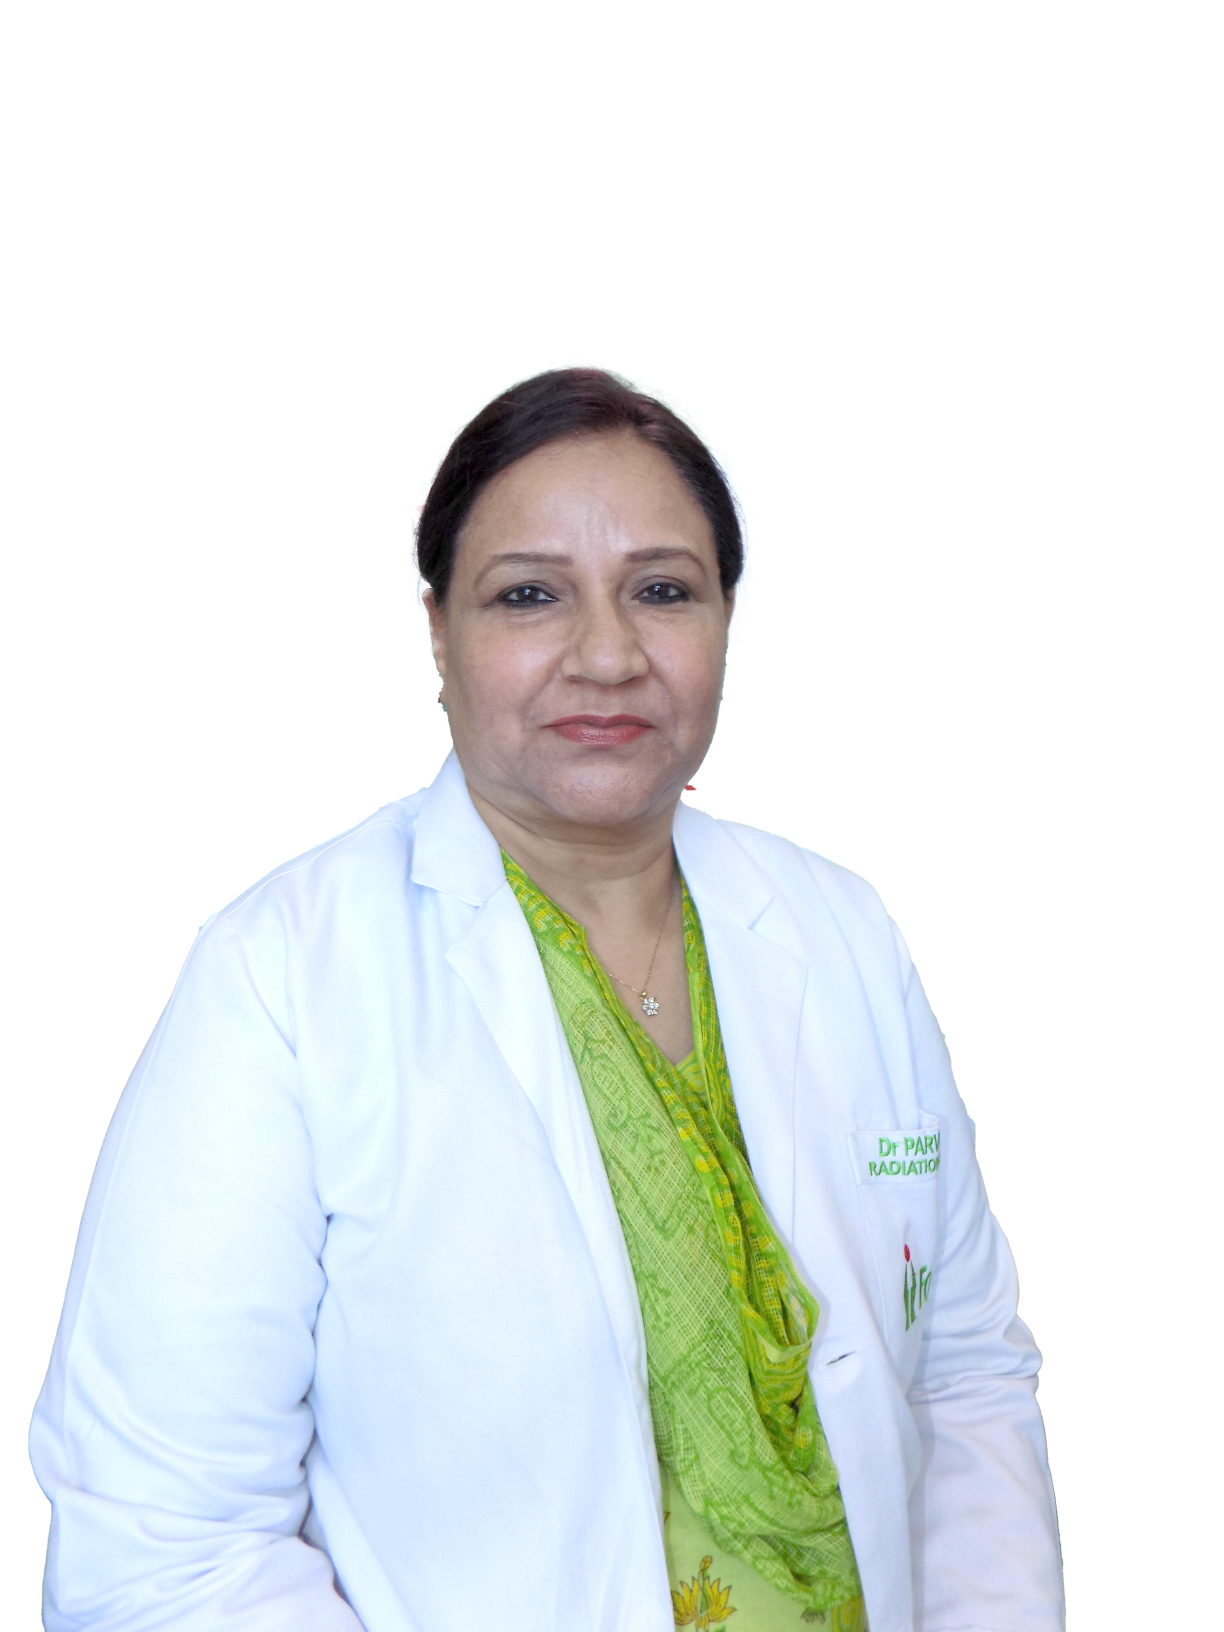 Dr. Parveen Kaur Oncology | Radiation Oncology Fortis Hospital, Ludhiana